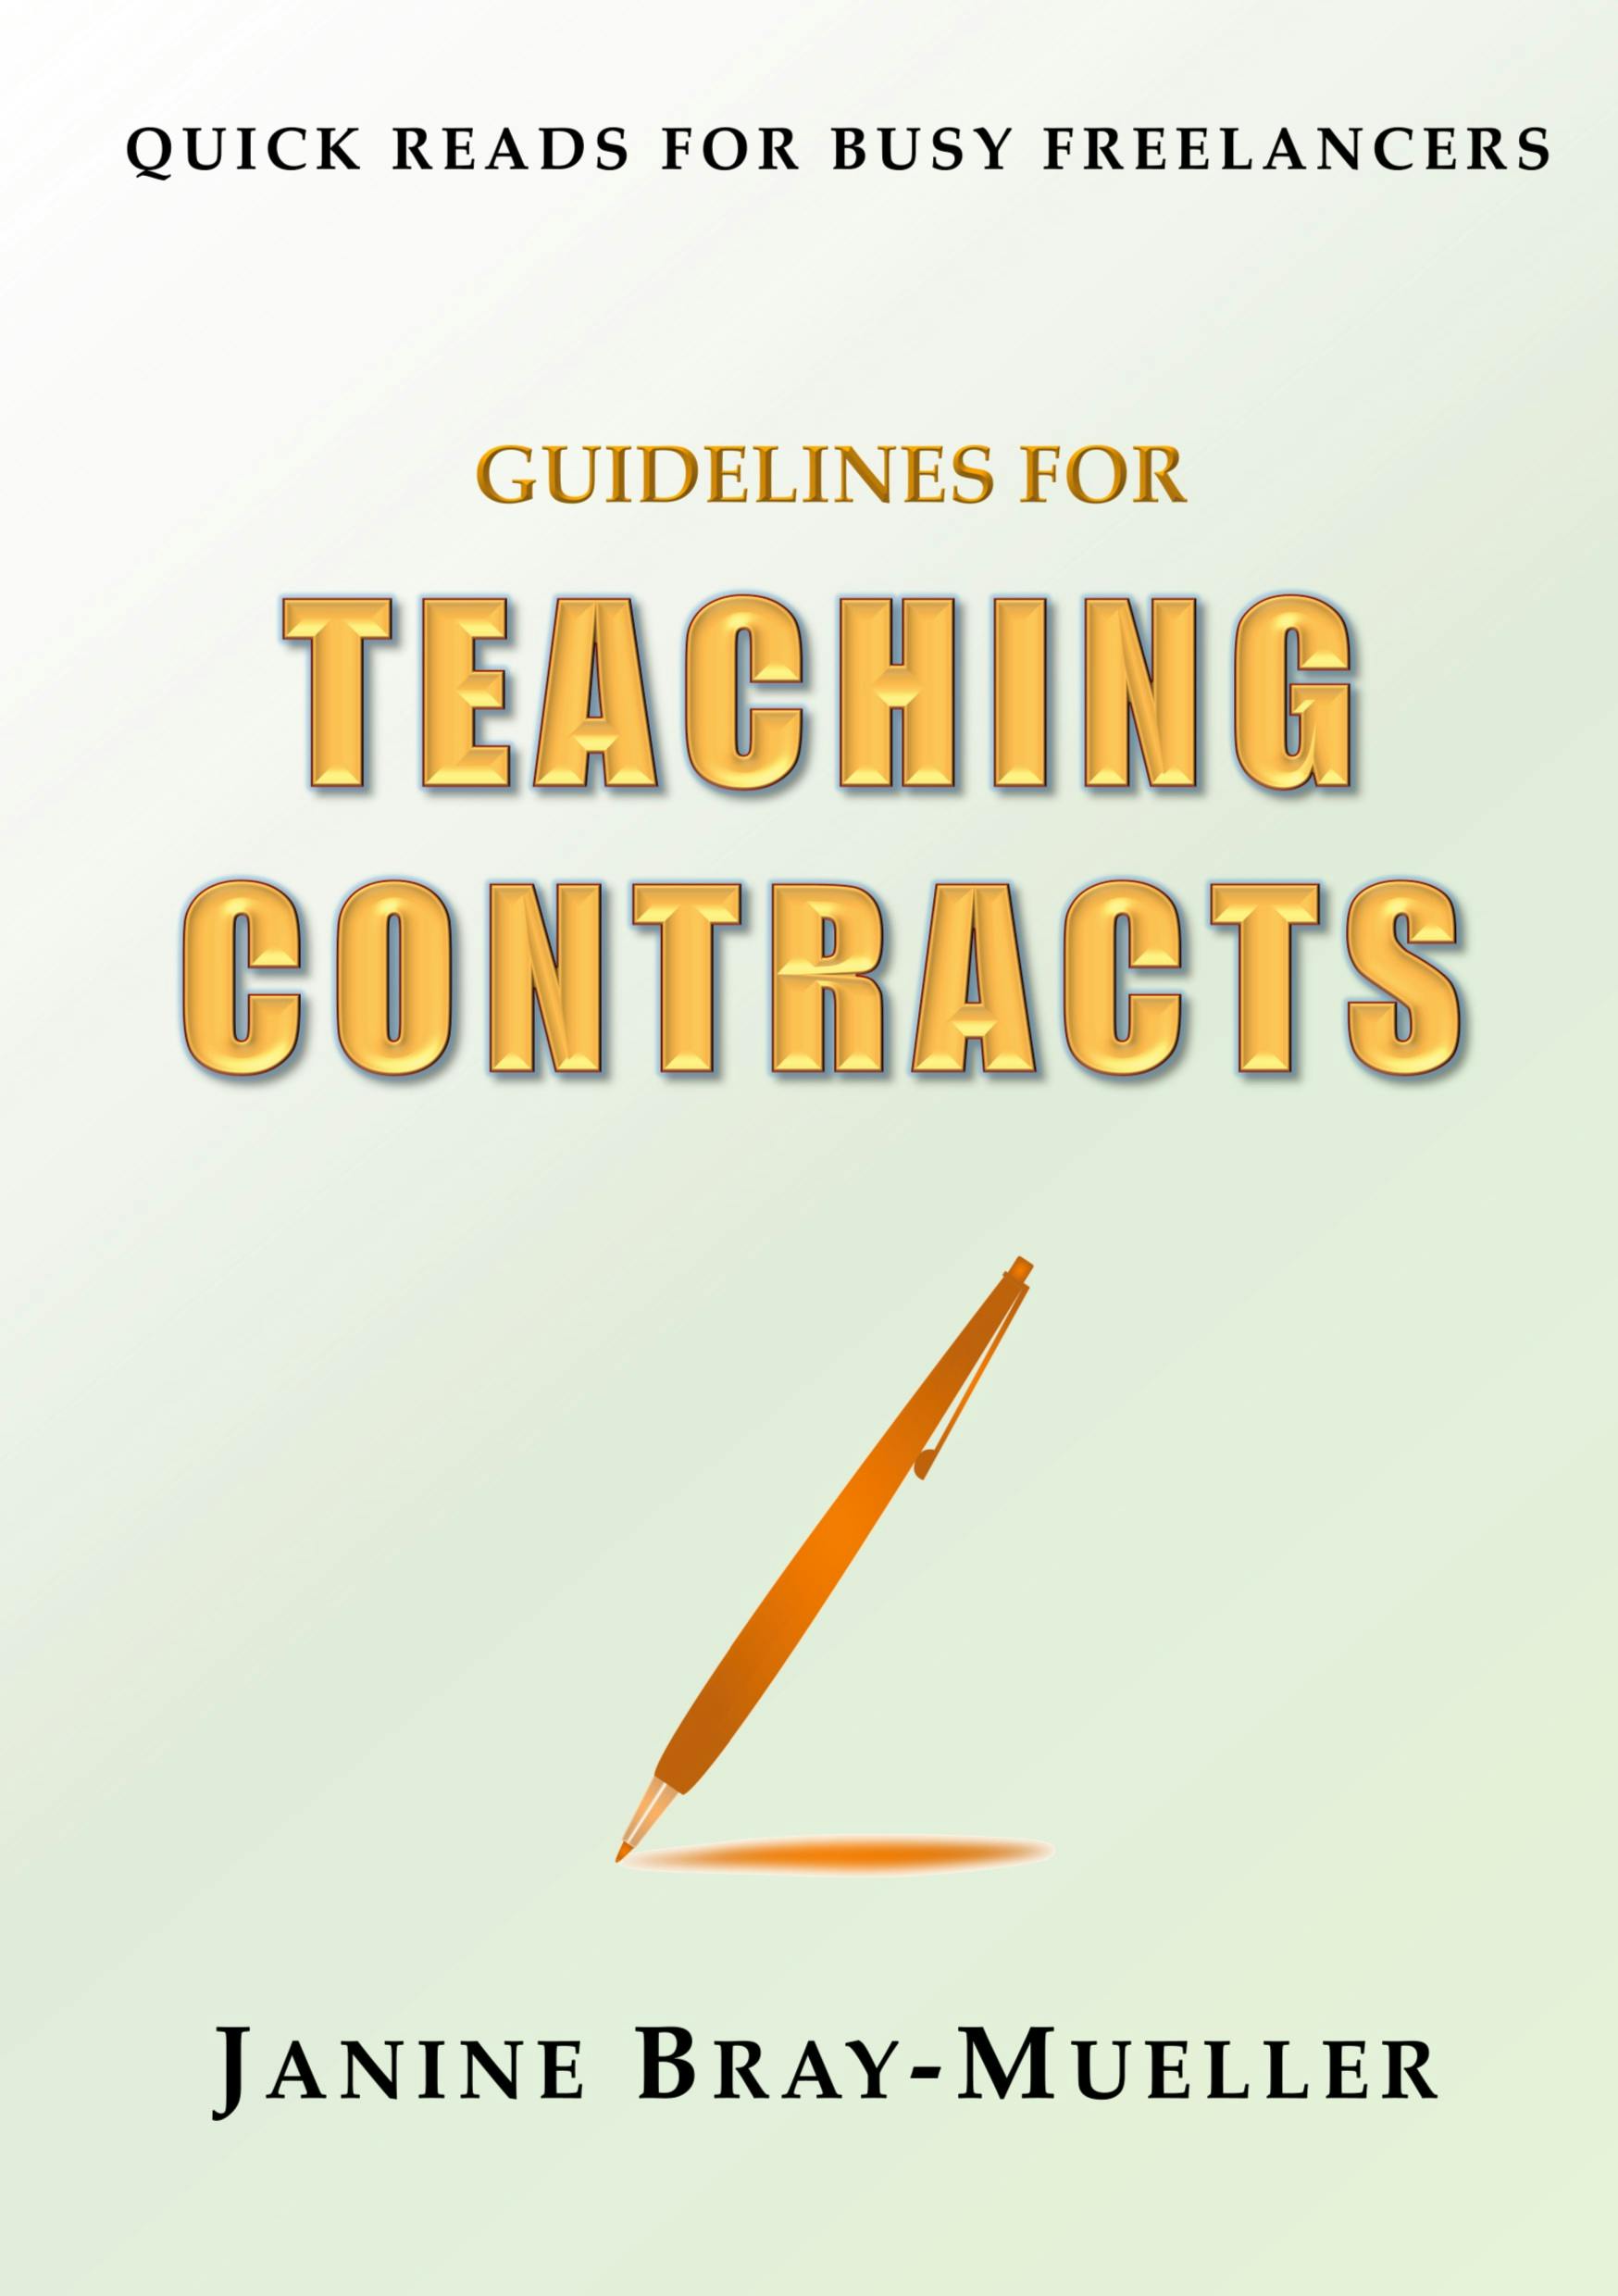 Guidelines for Teaching Contracts - Janine Bray-Mueller